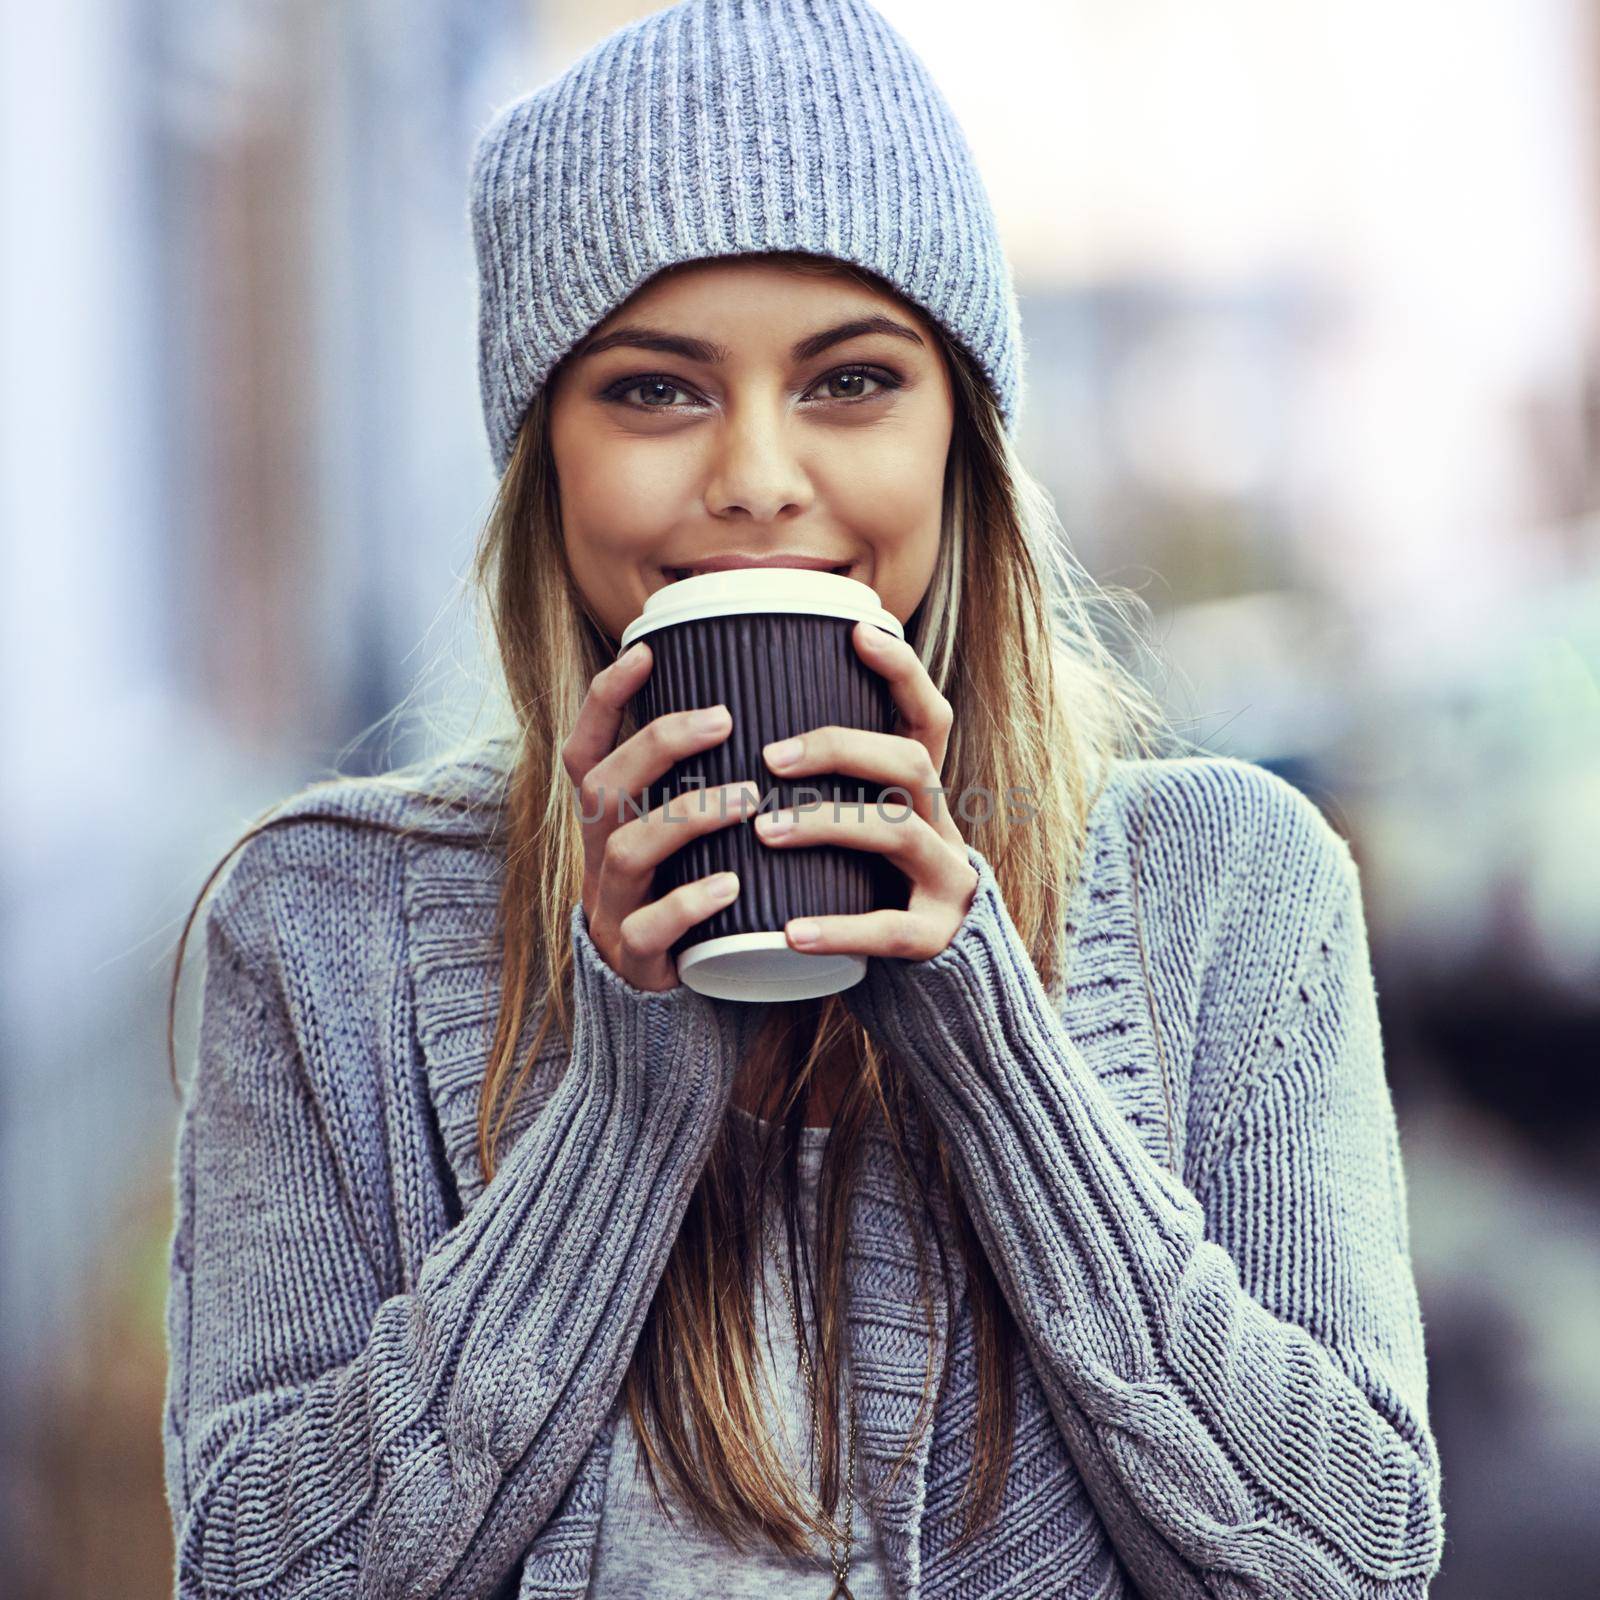 Shes just been to her favorite coffee place. Portrait of a beautful young woman drinking coffee while out in the city. by YuriArcurs